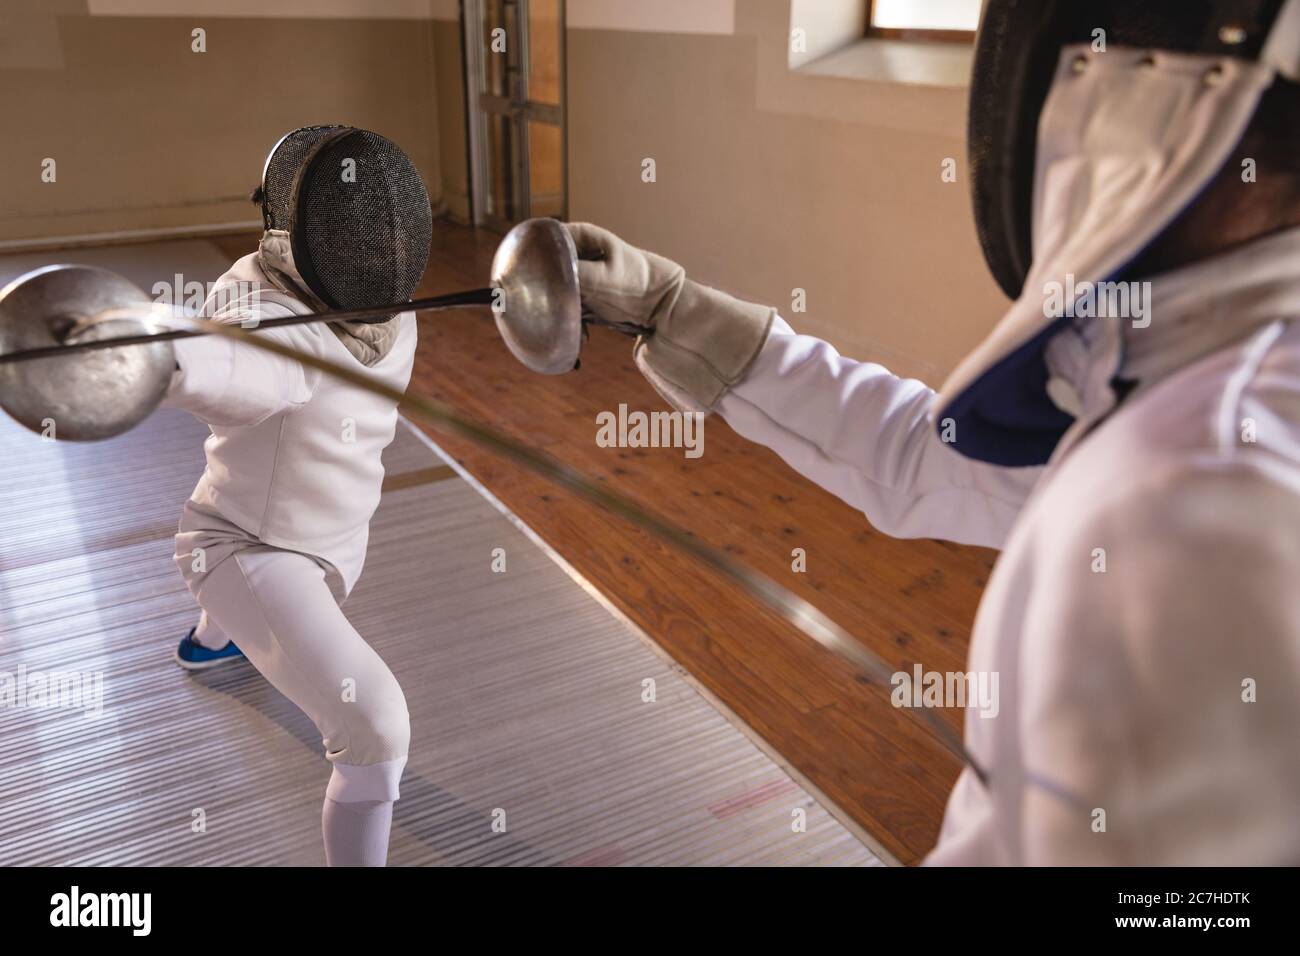 Two male fencers practicing fencing Stock Photo